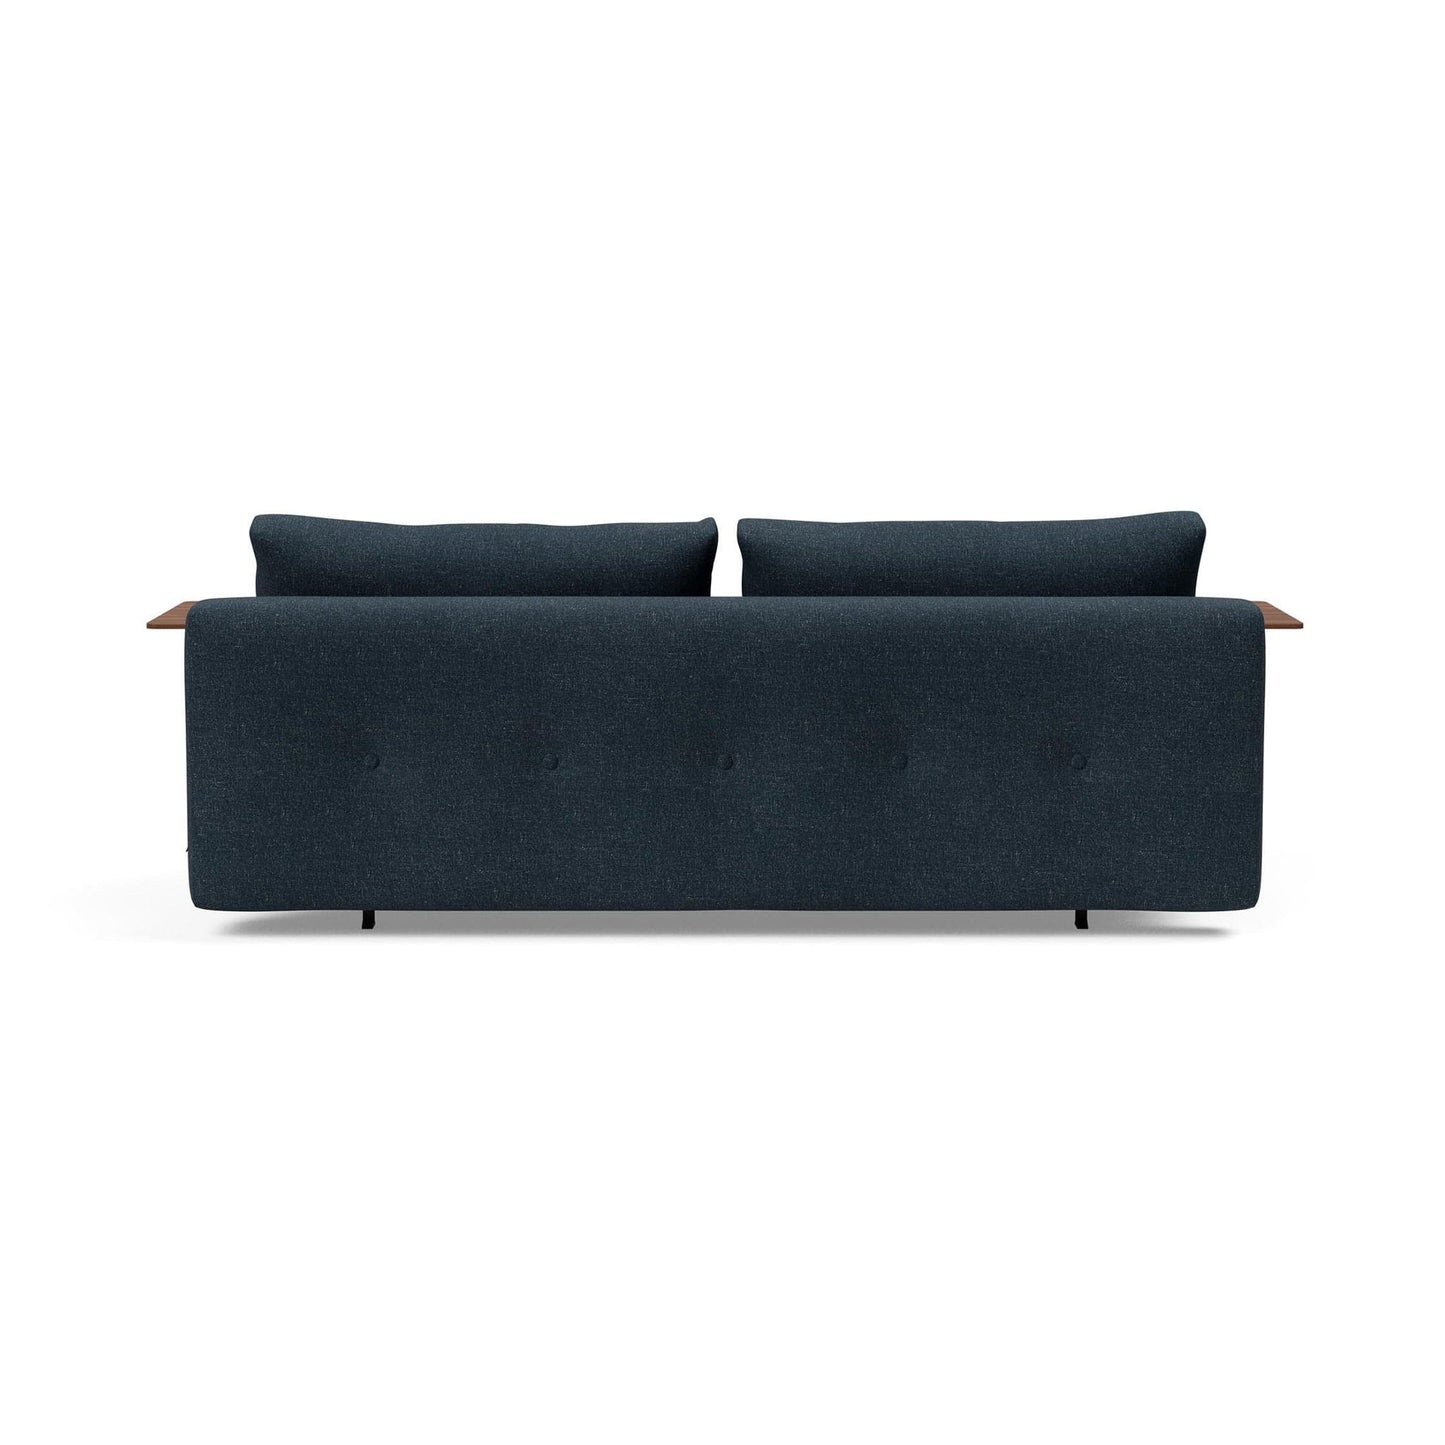 Recast Plus Sofa Bed With Arms